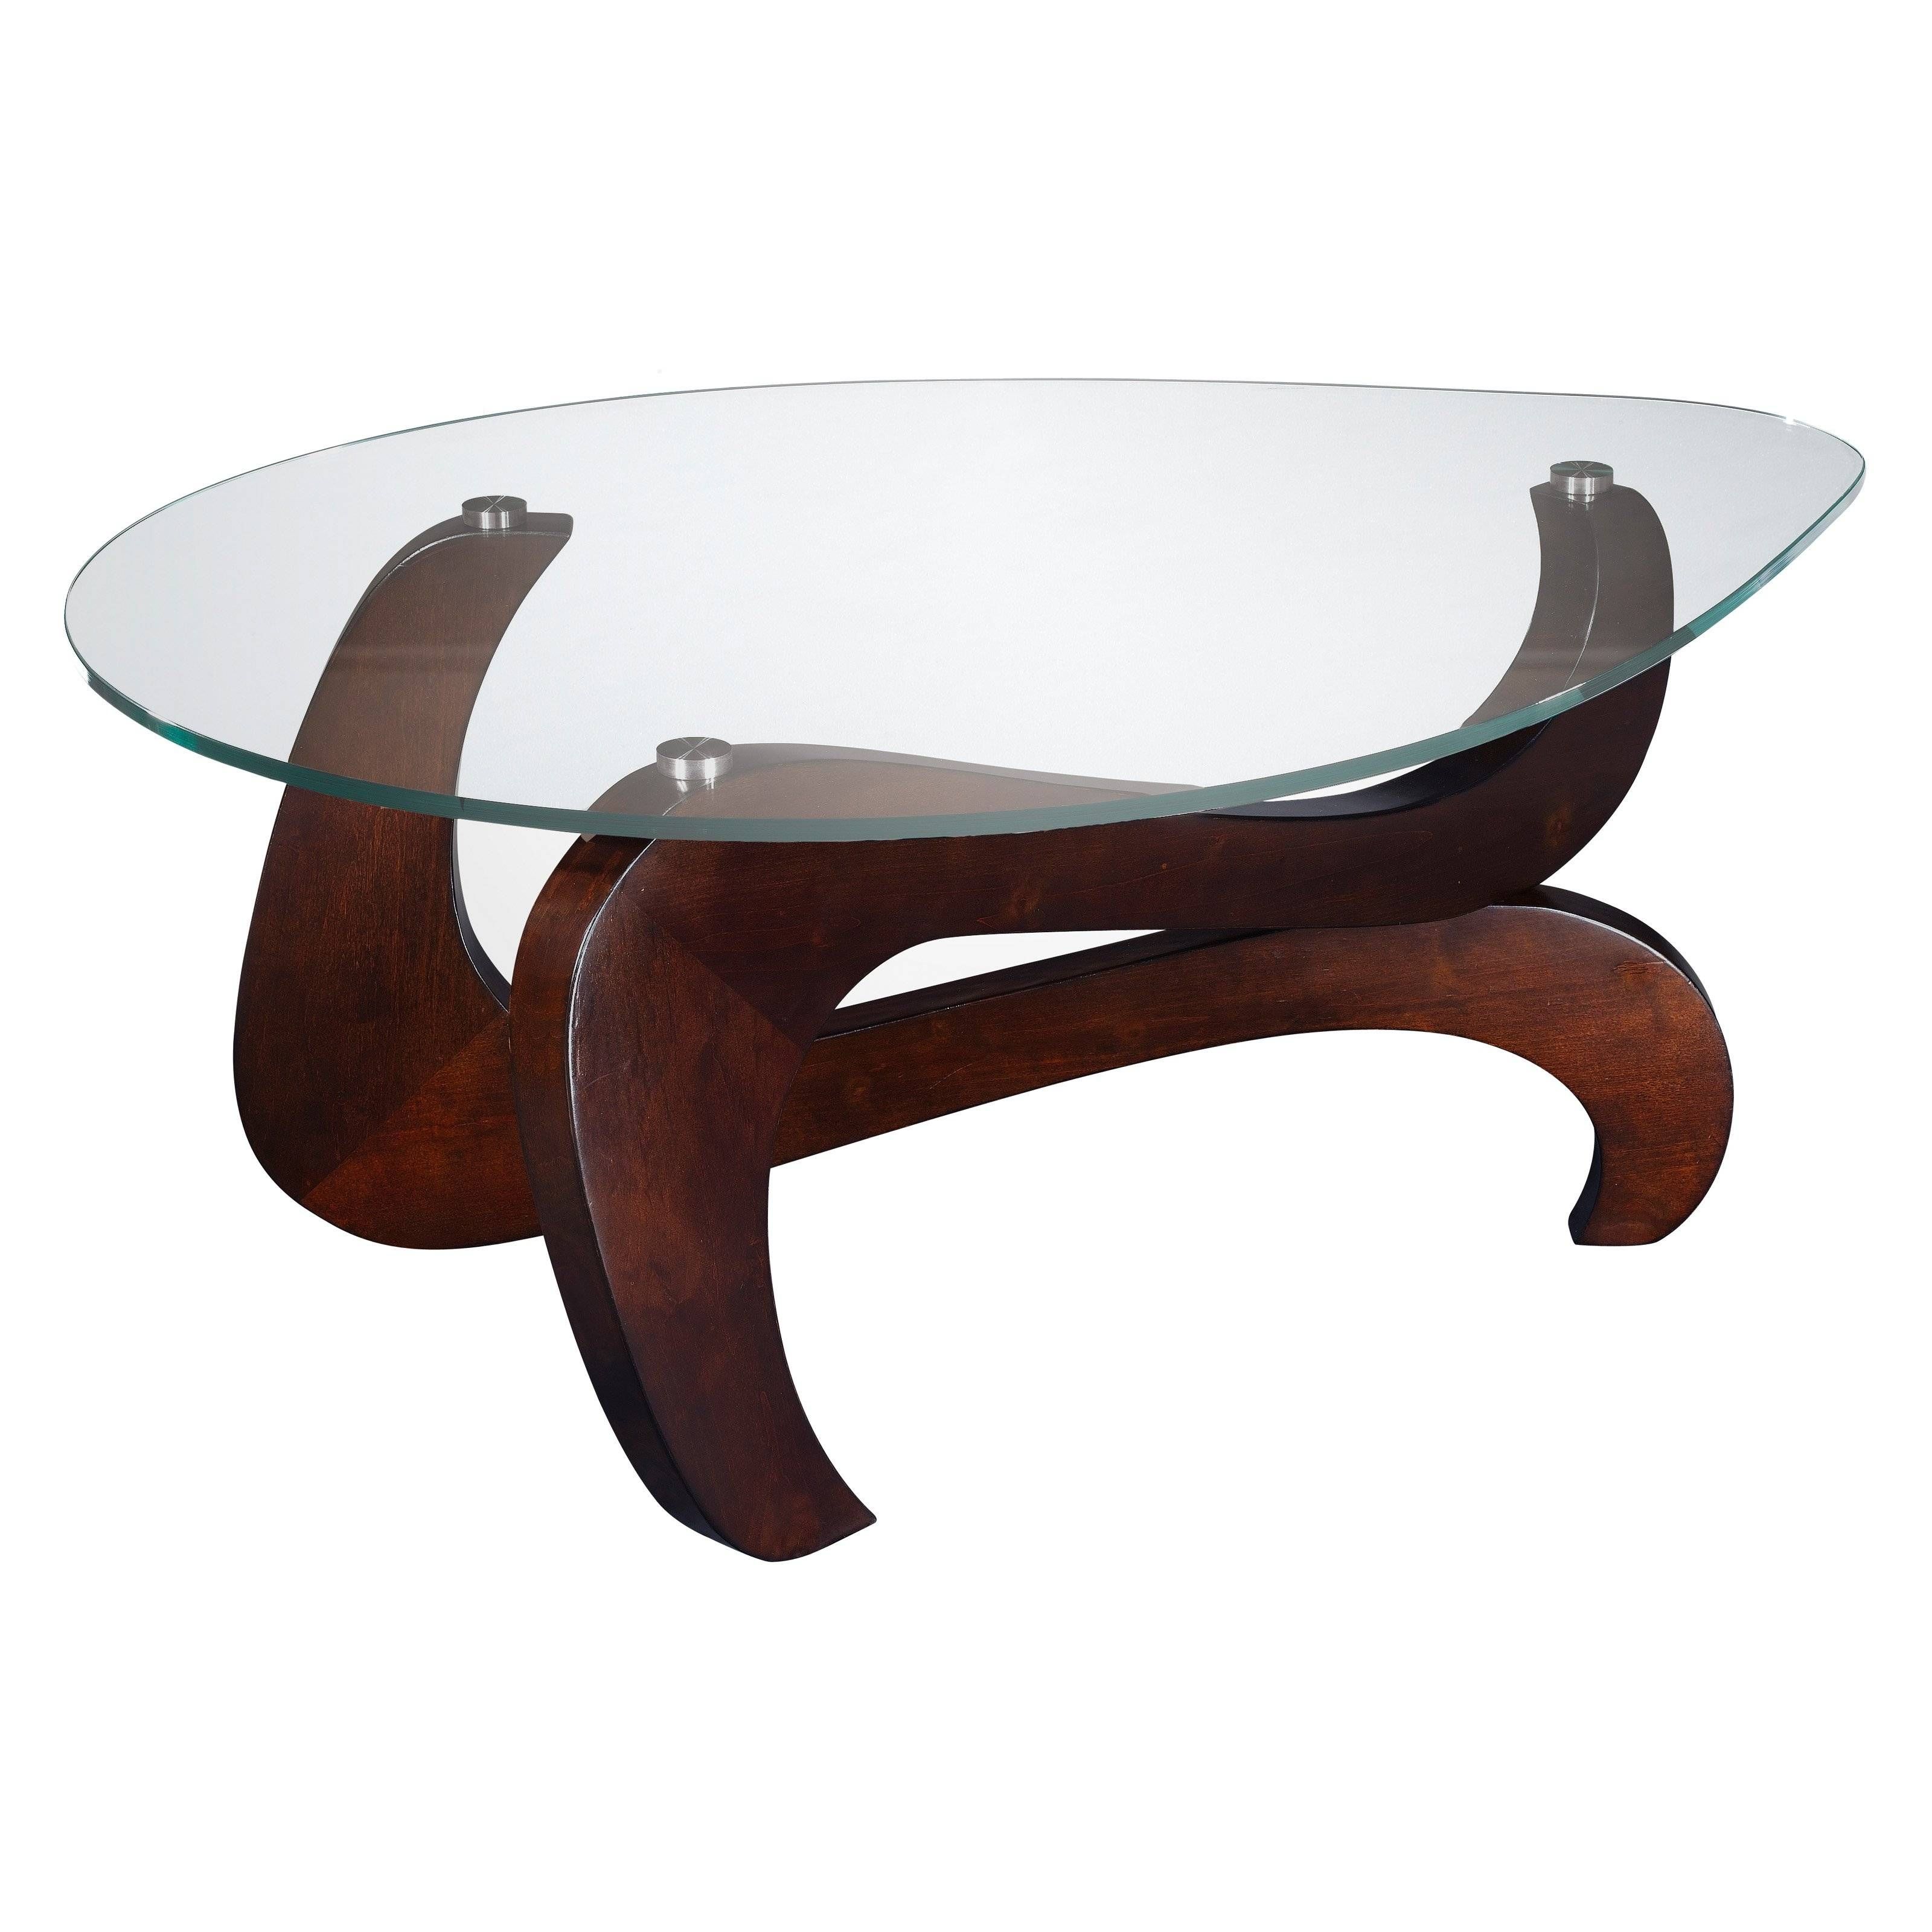 Round Wood Coffee Table With Glass Top For Dark Wood Coffee Tables With Glass Top (View 18 of 30)